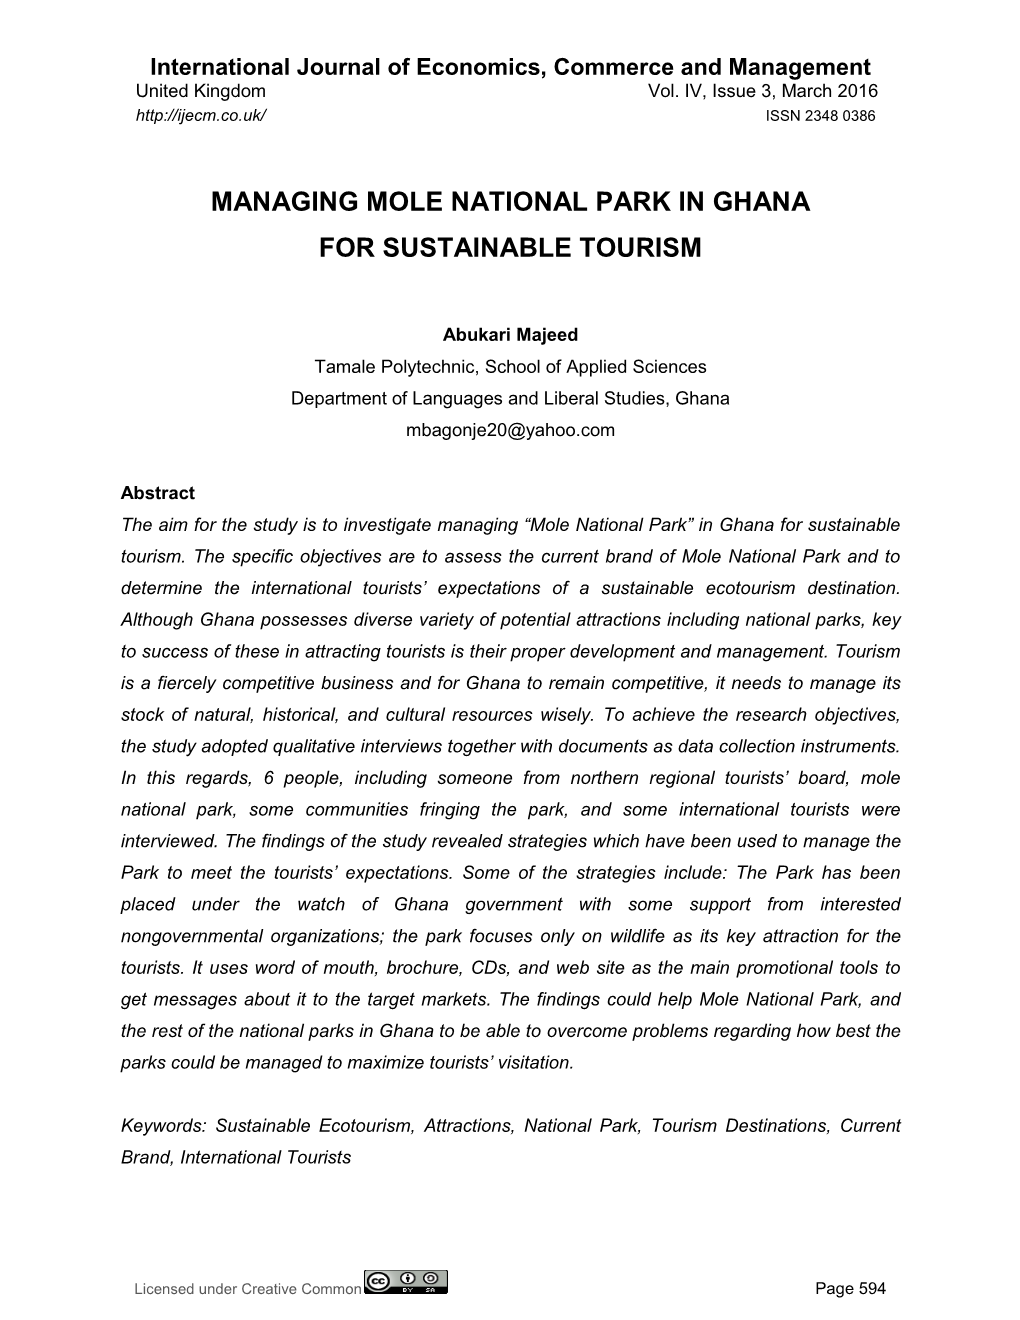 Managing Mole National Park in Ghana for Sustainable Tourism